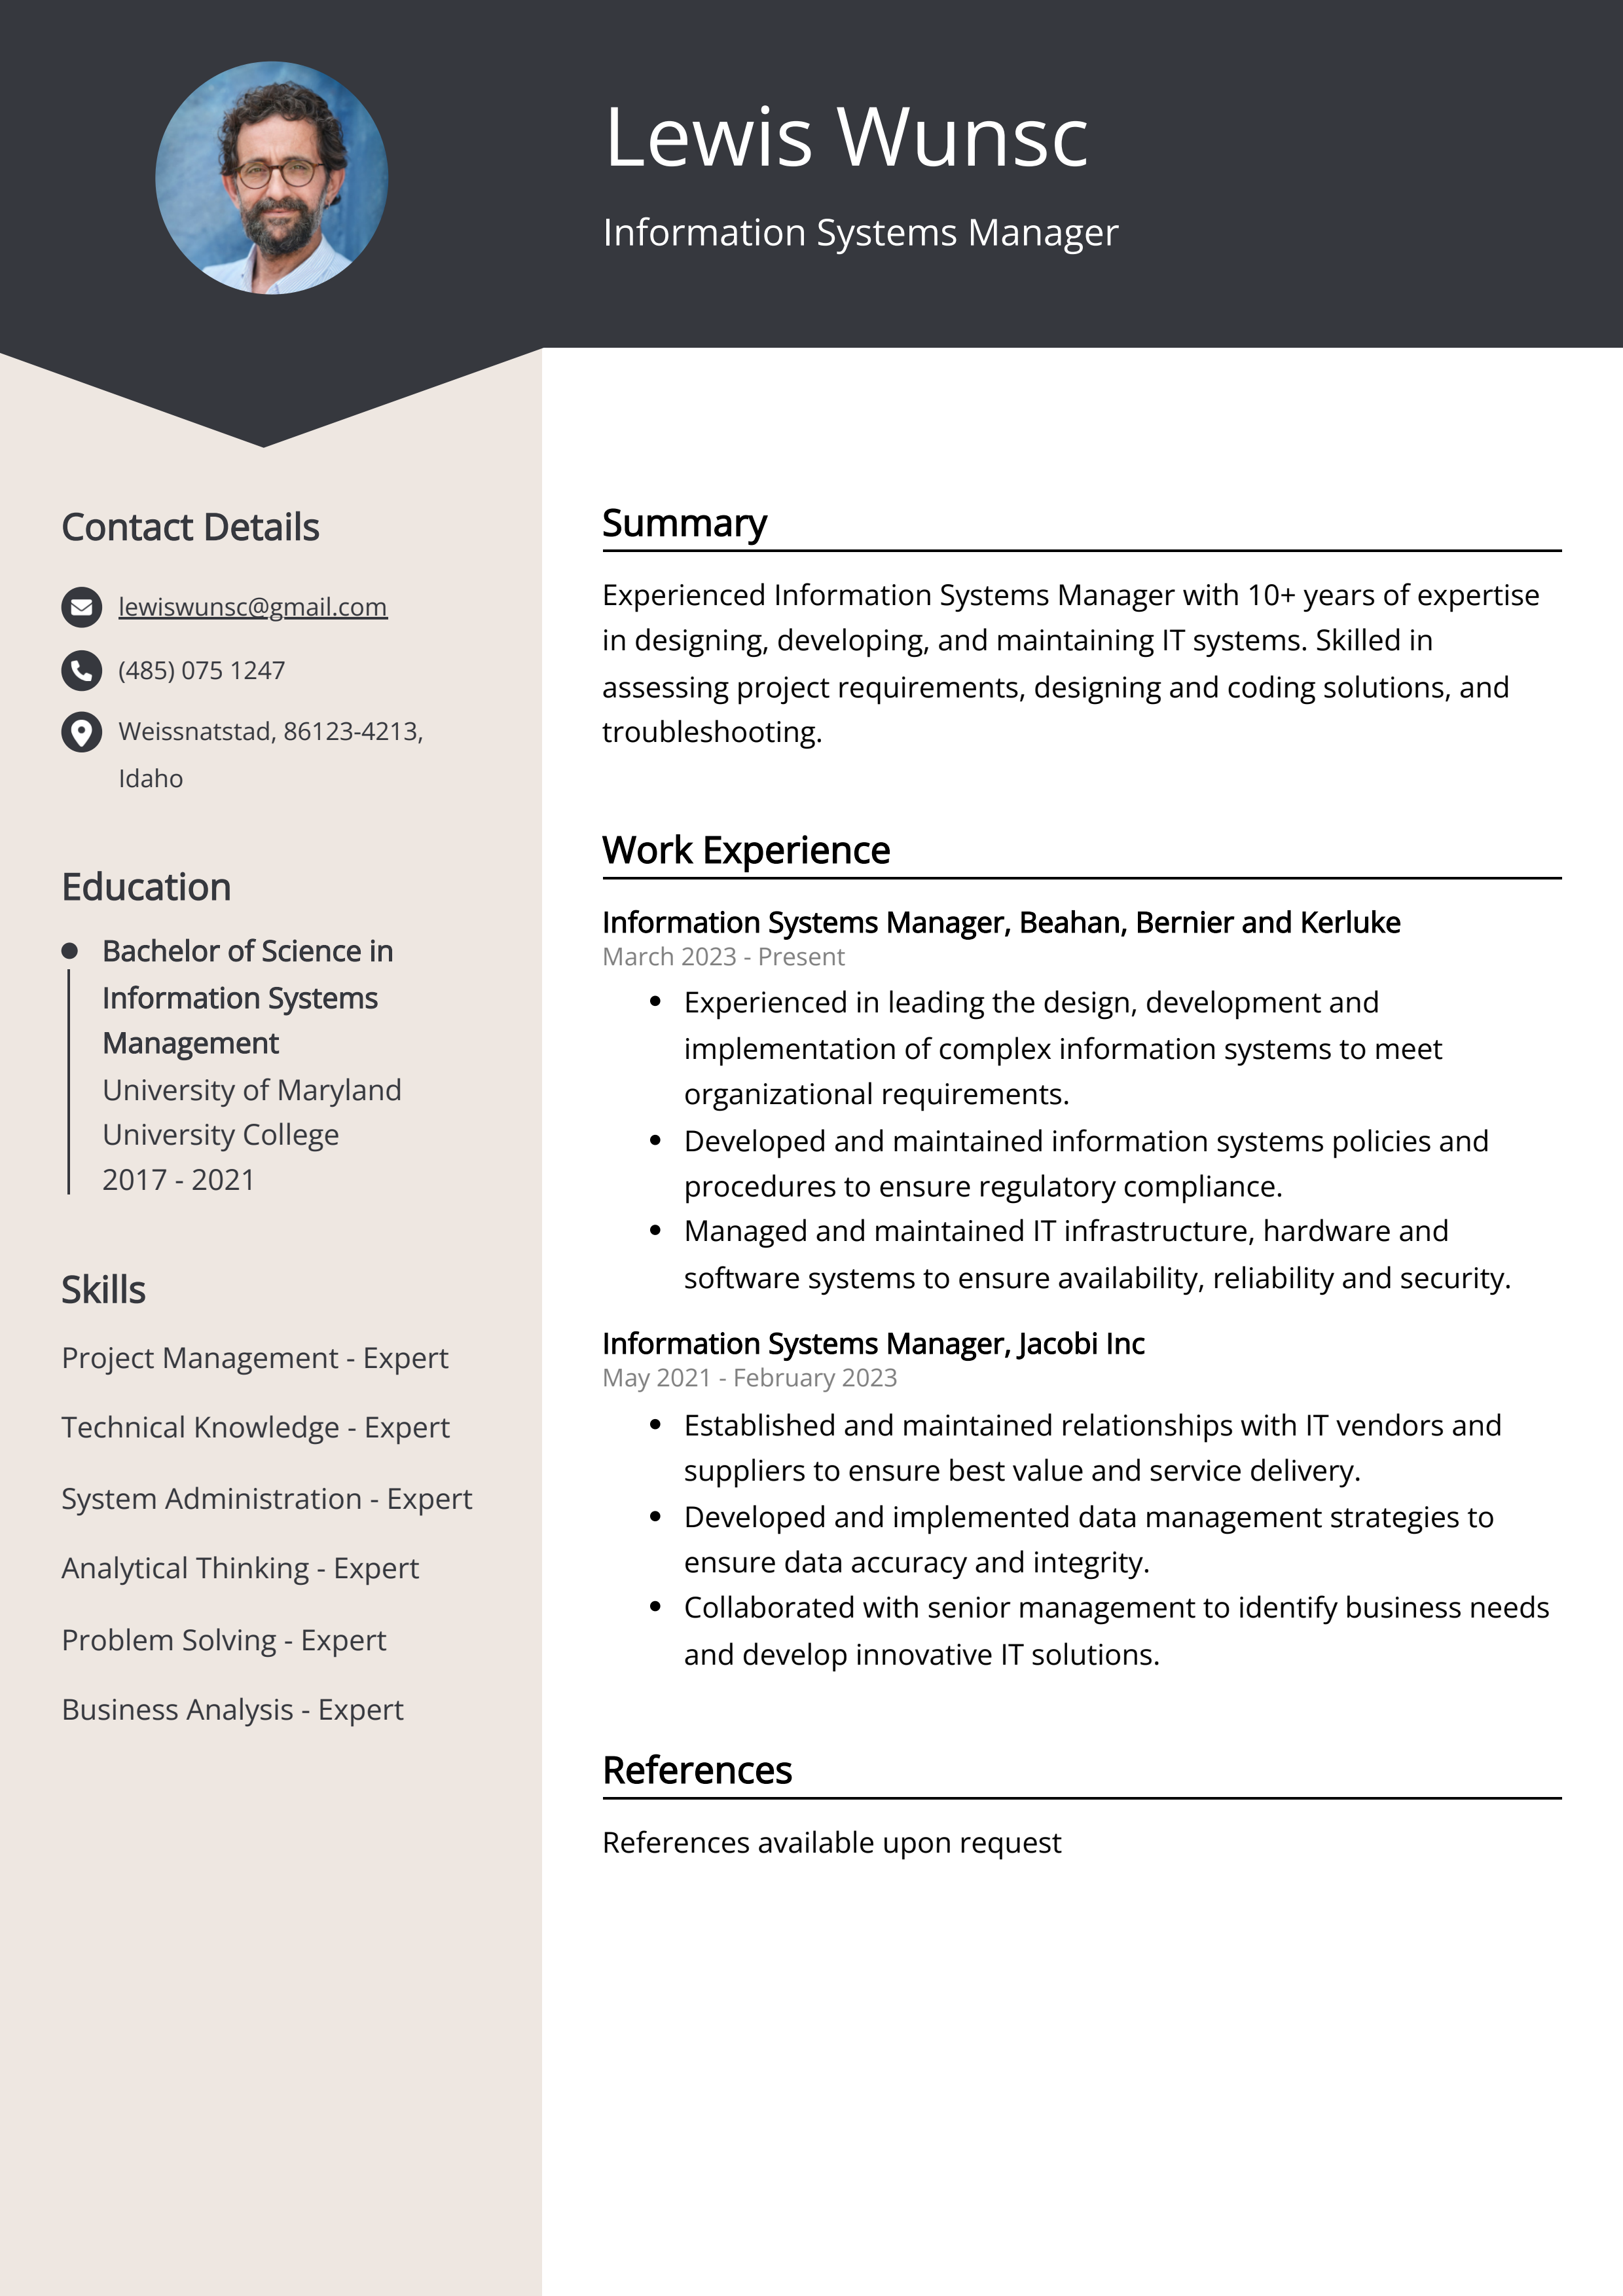 Information Systems Manager CV Example